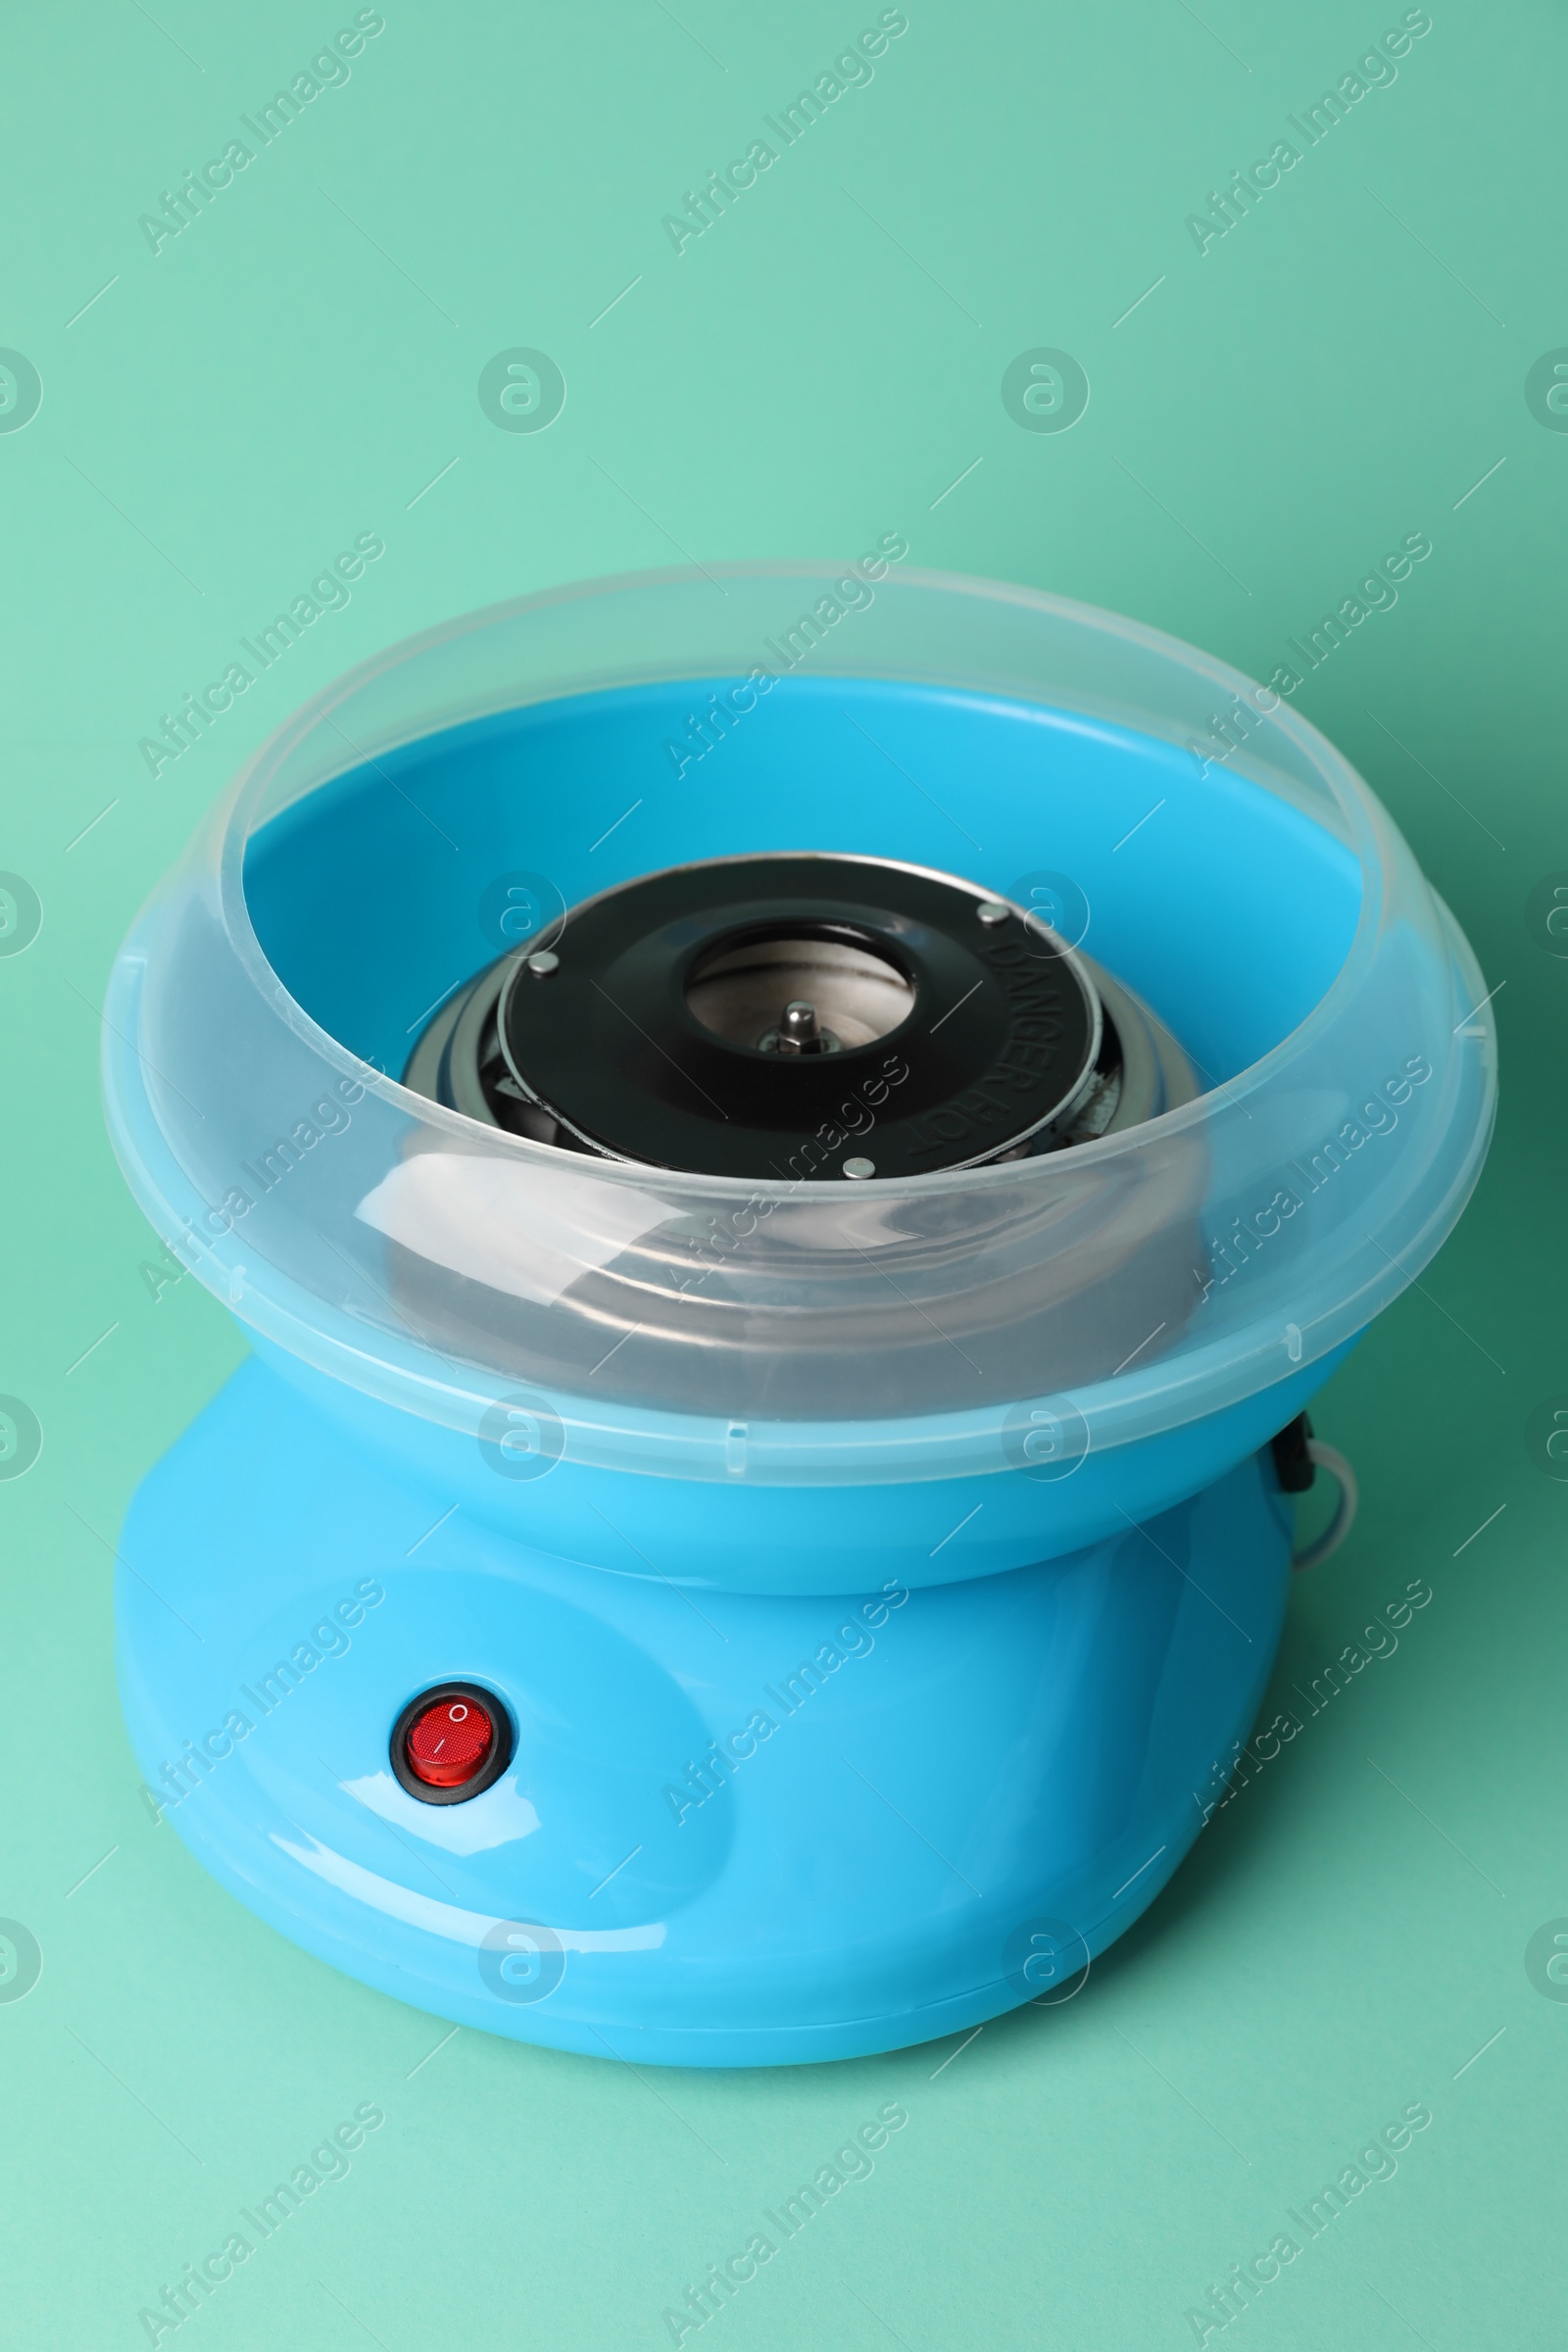 Photo of Portable candy cotton machine on turquoise background